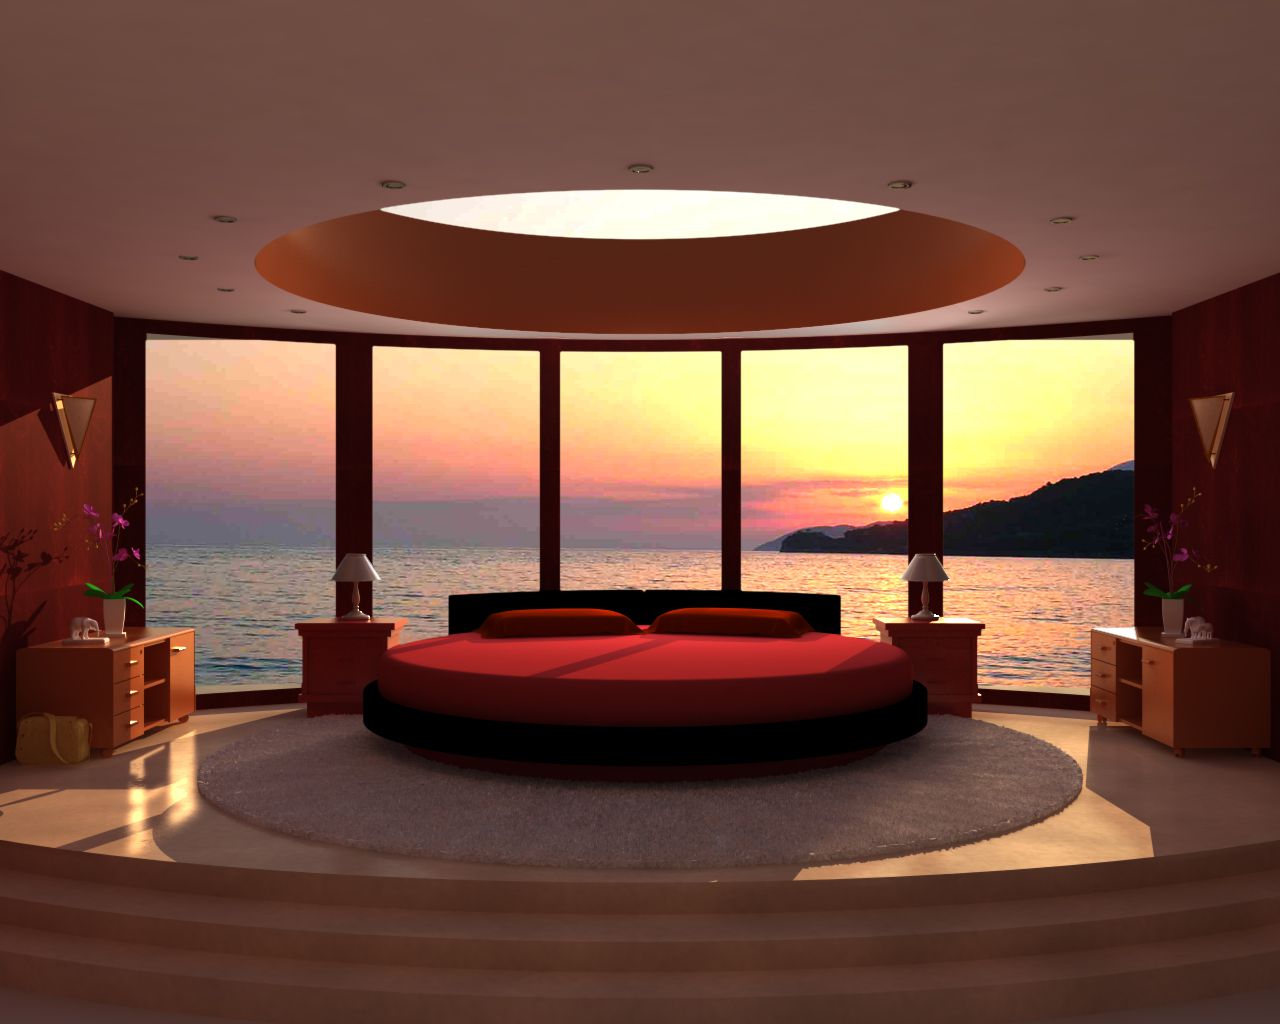 Circle Skylight Bedroom Winsome Circle Skylight For Unique Bedroom Ideas Apropos To Red And Black Bed Design Unique Bedroom Ideas Preserving The Cozy Vibe In Style